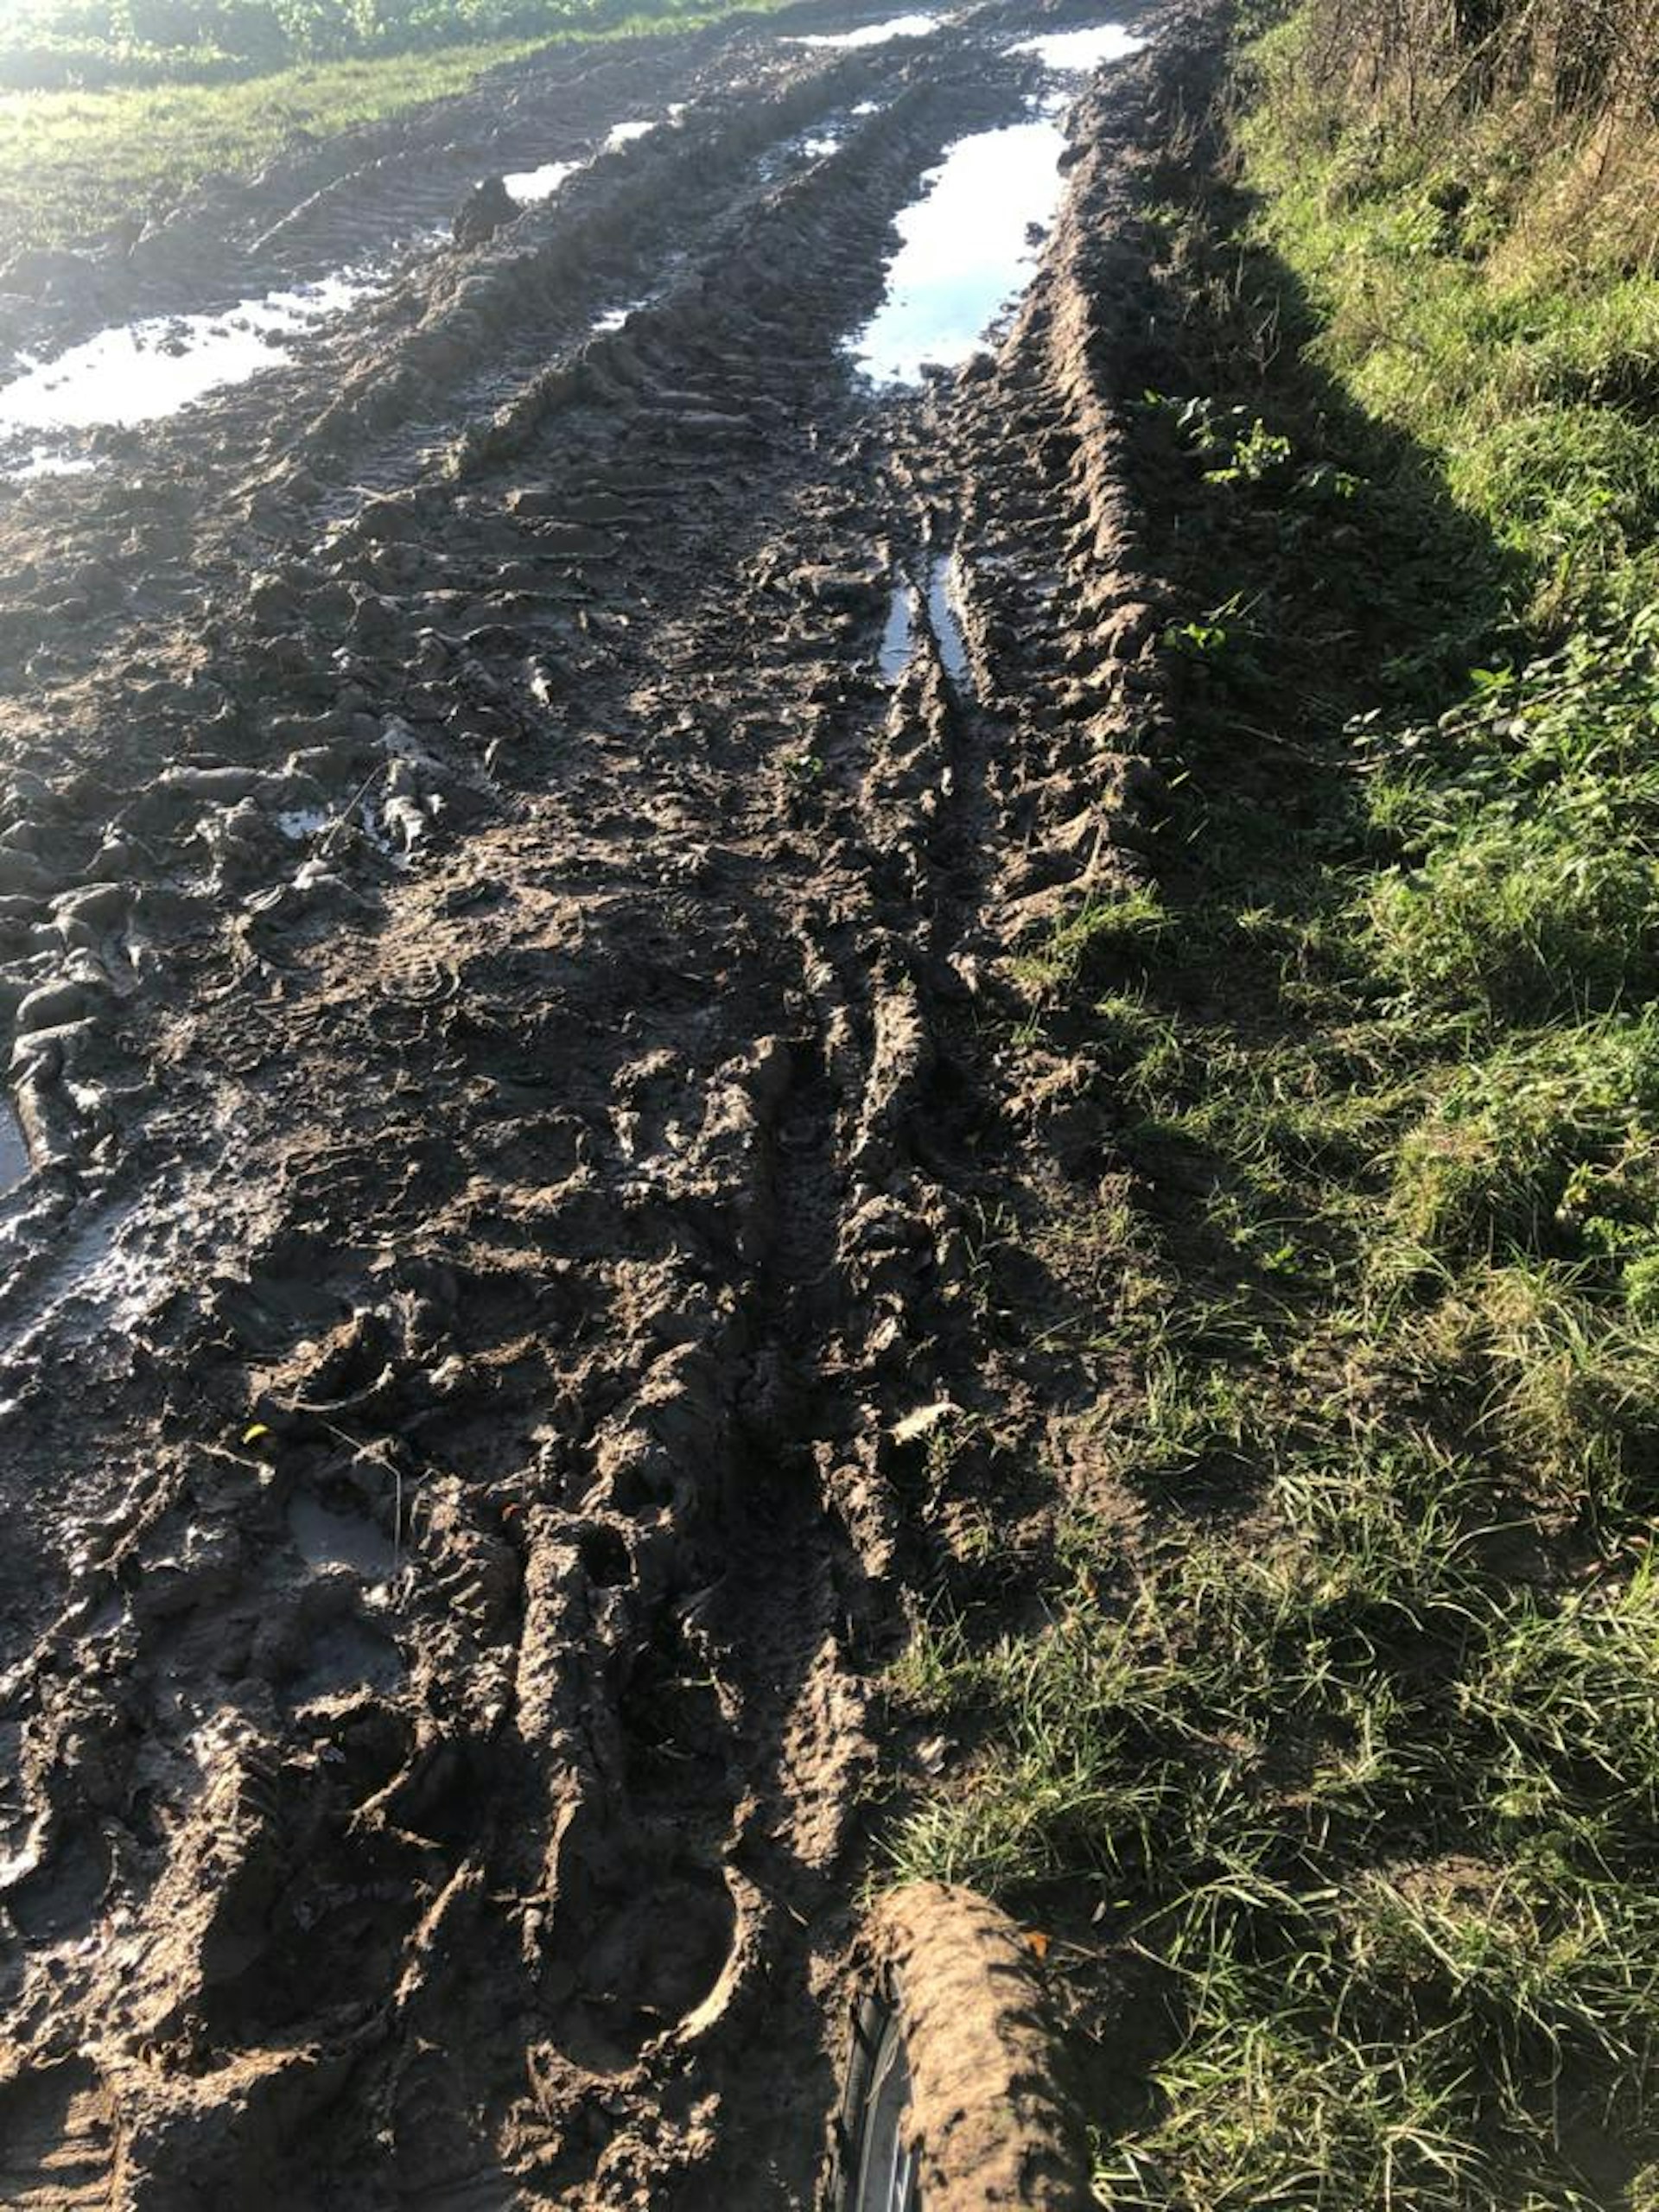 Muddy trail with large tractor tracks